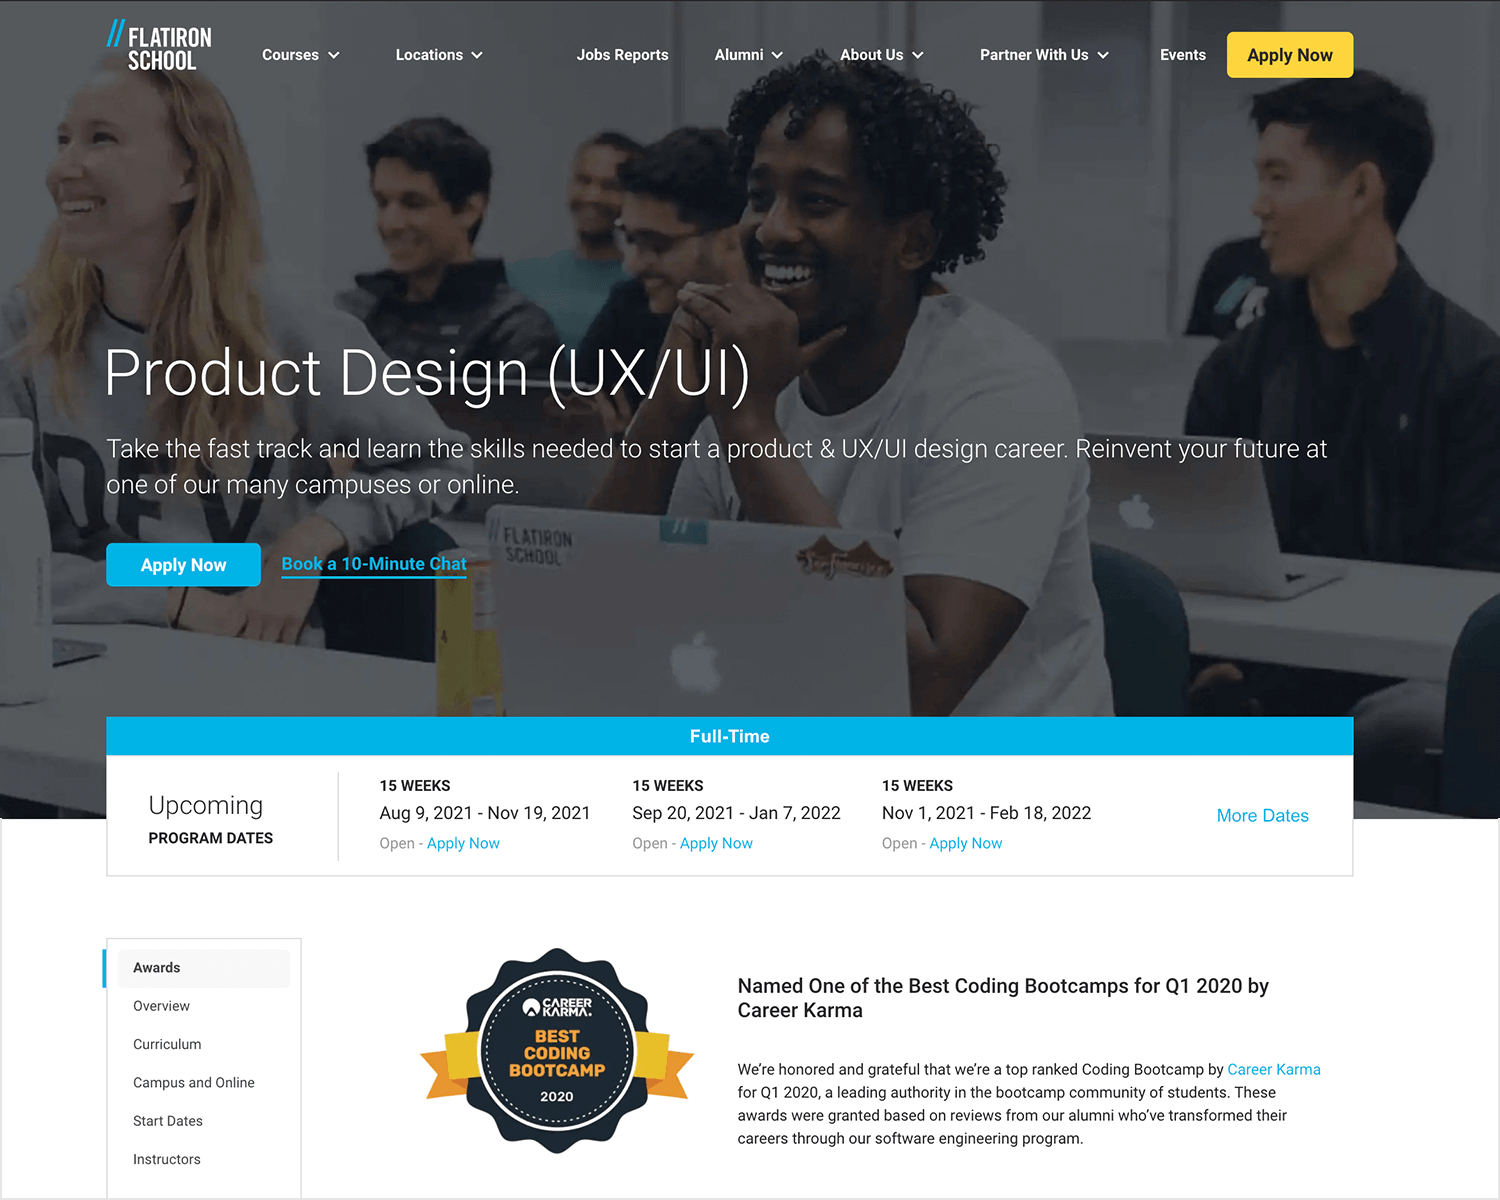 paid ux design course by flatiron